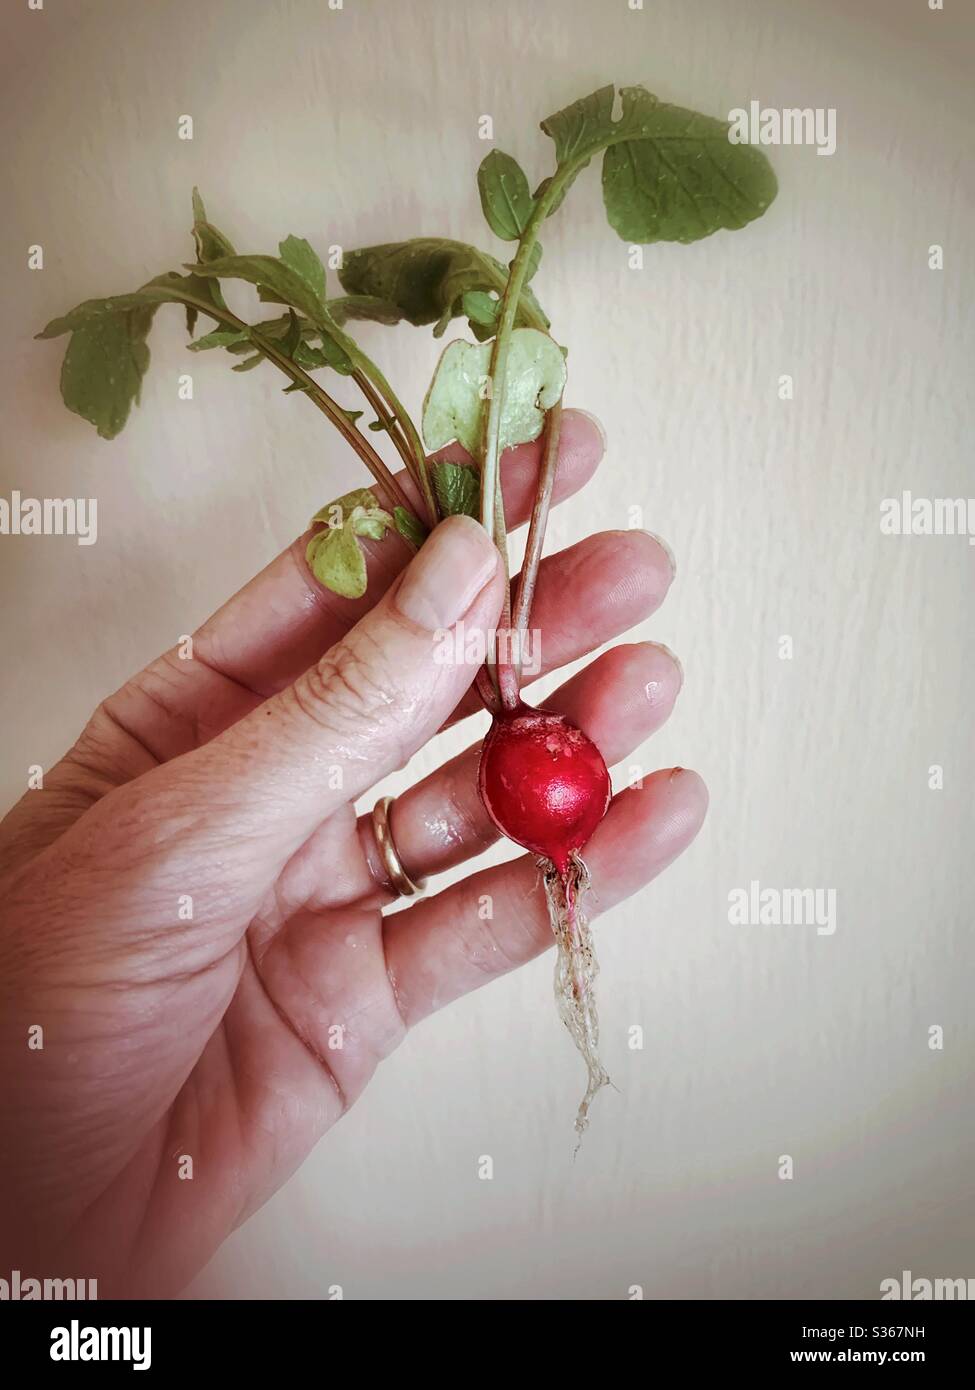 A woman’s hand holds a radish just picked from the garden. Stock Photo